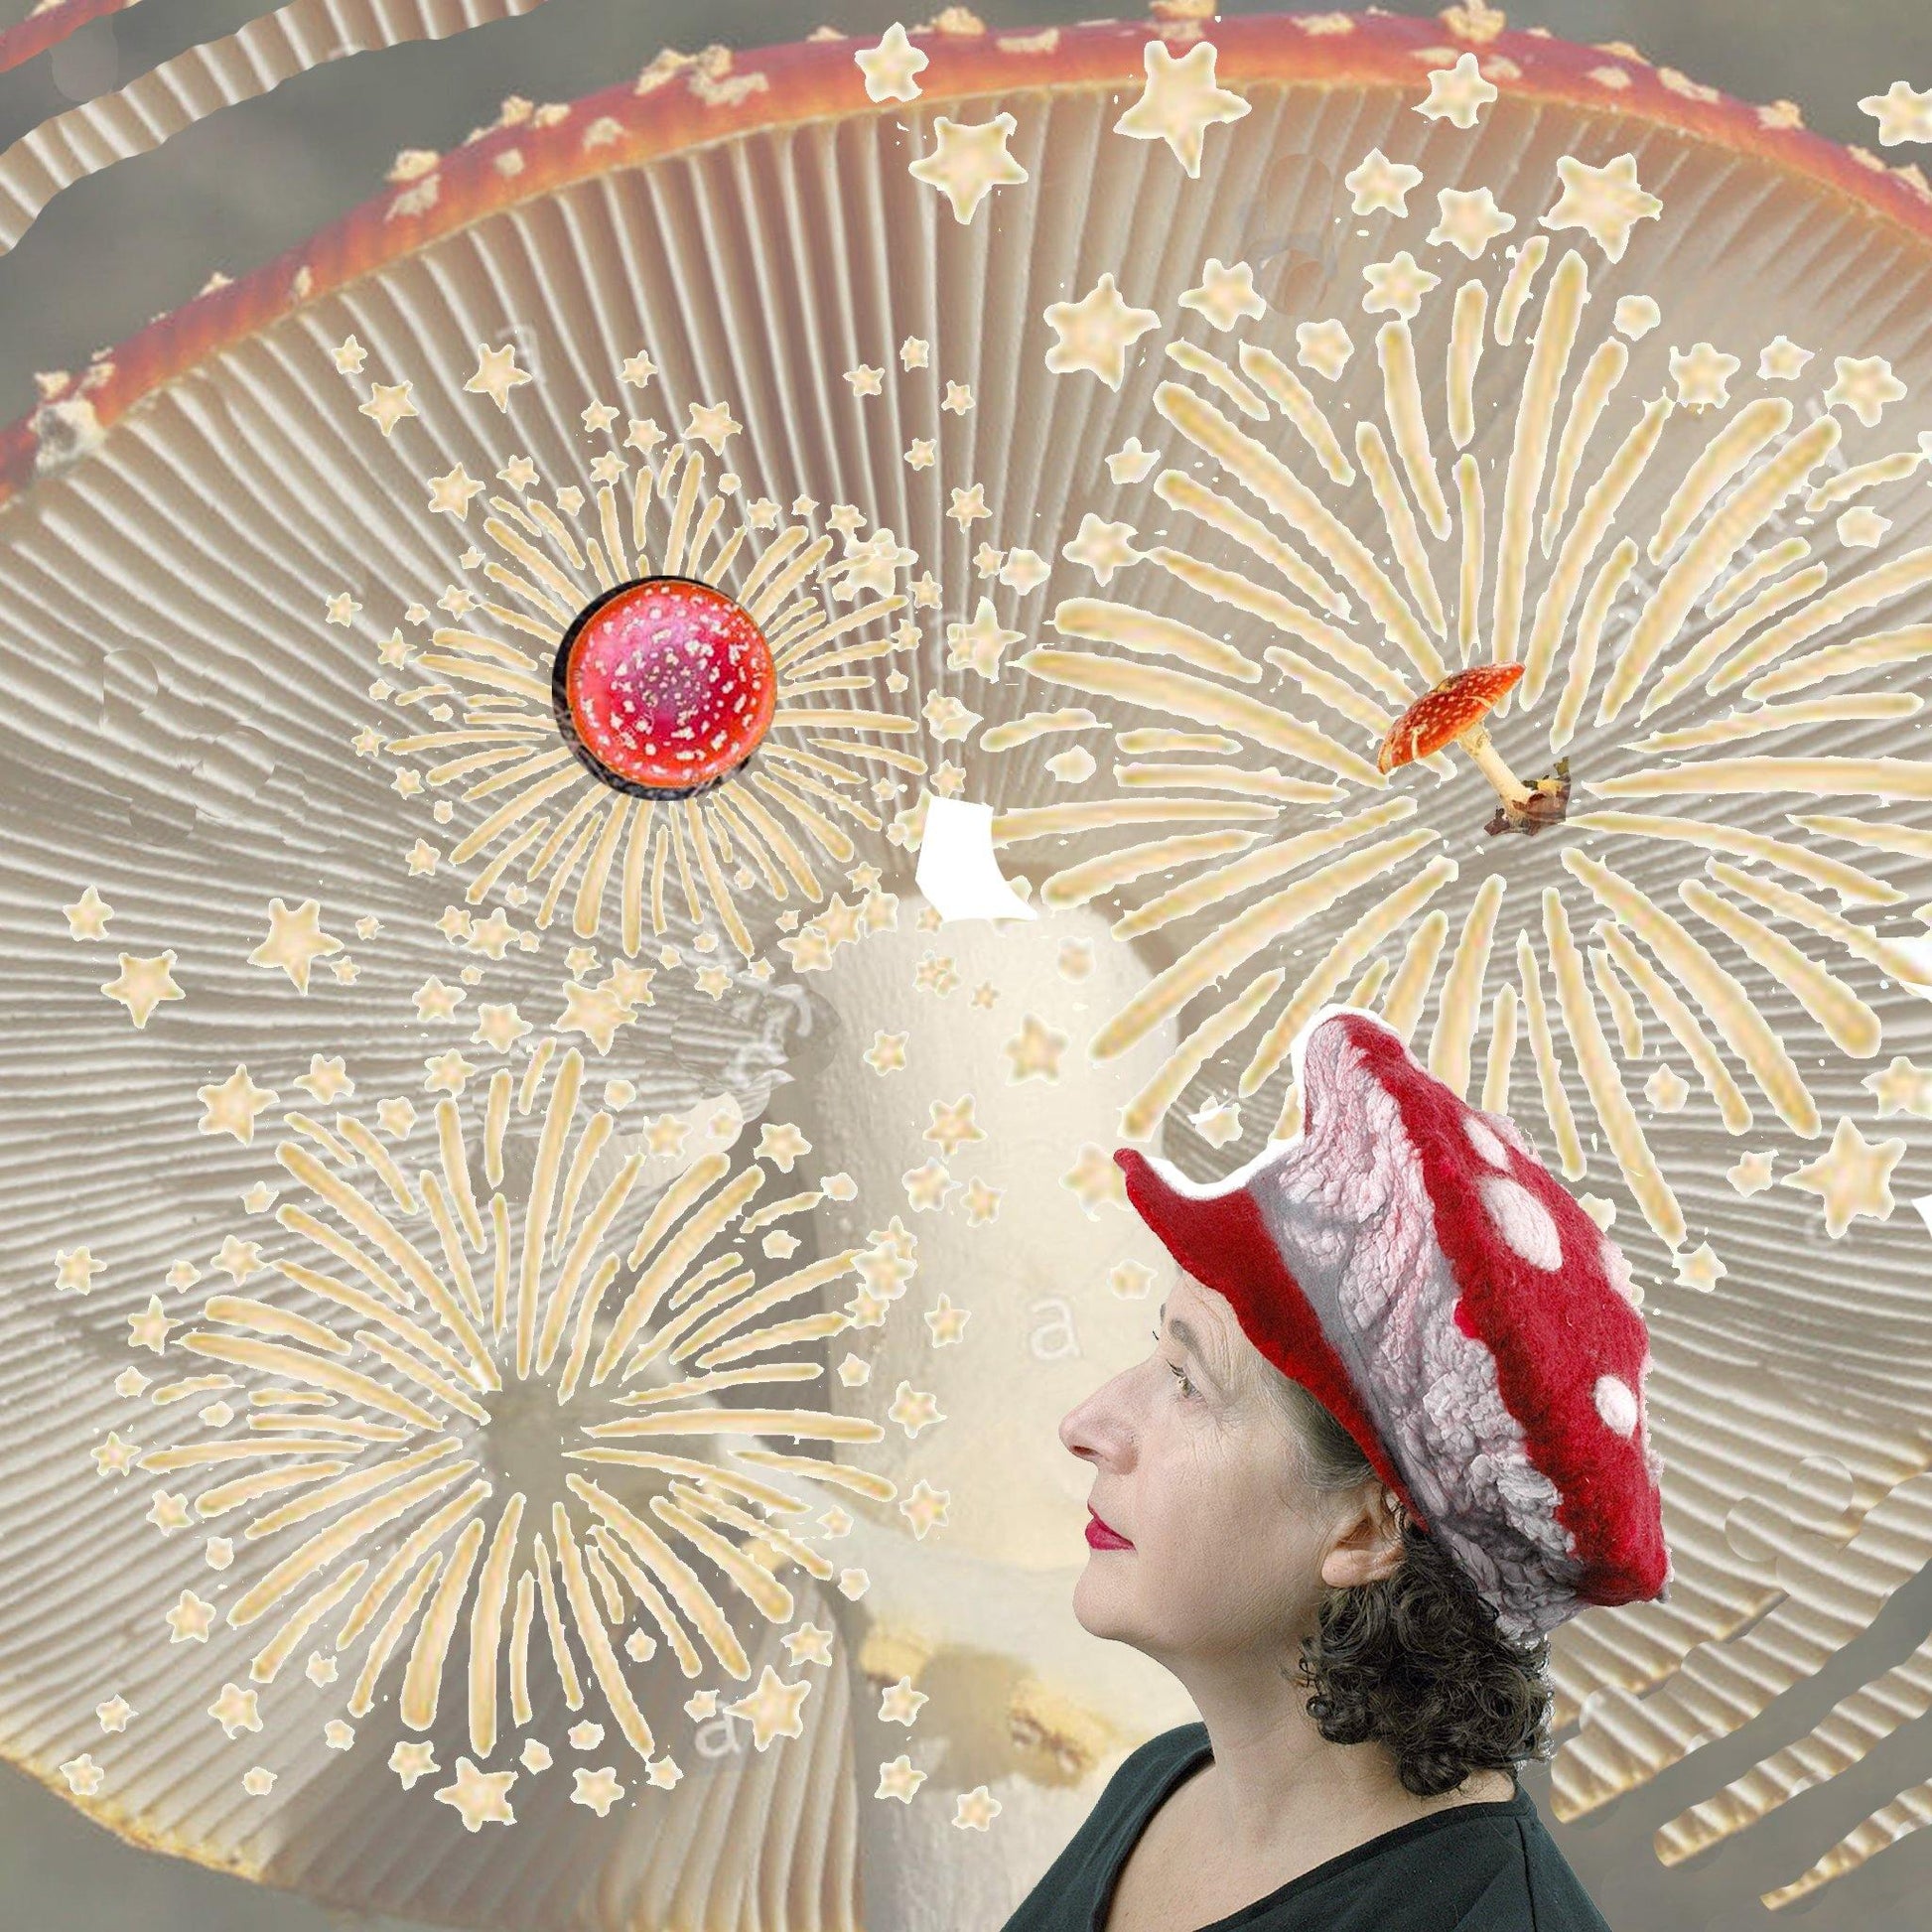 Mushroom Inspired Red and White Bandleader hat with collage of mushrooms and fireworks.